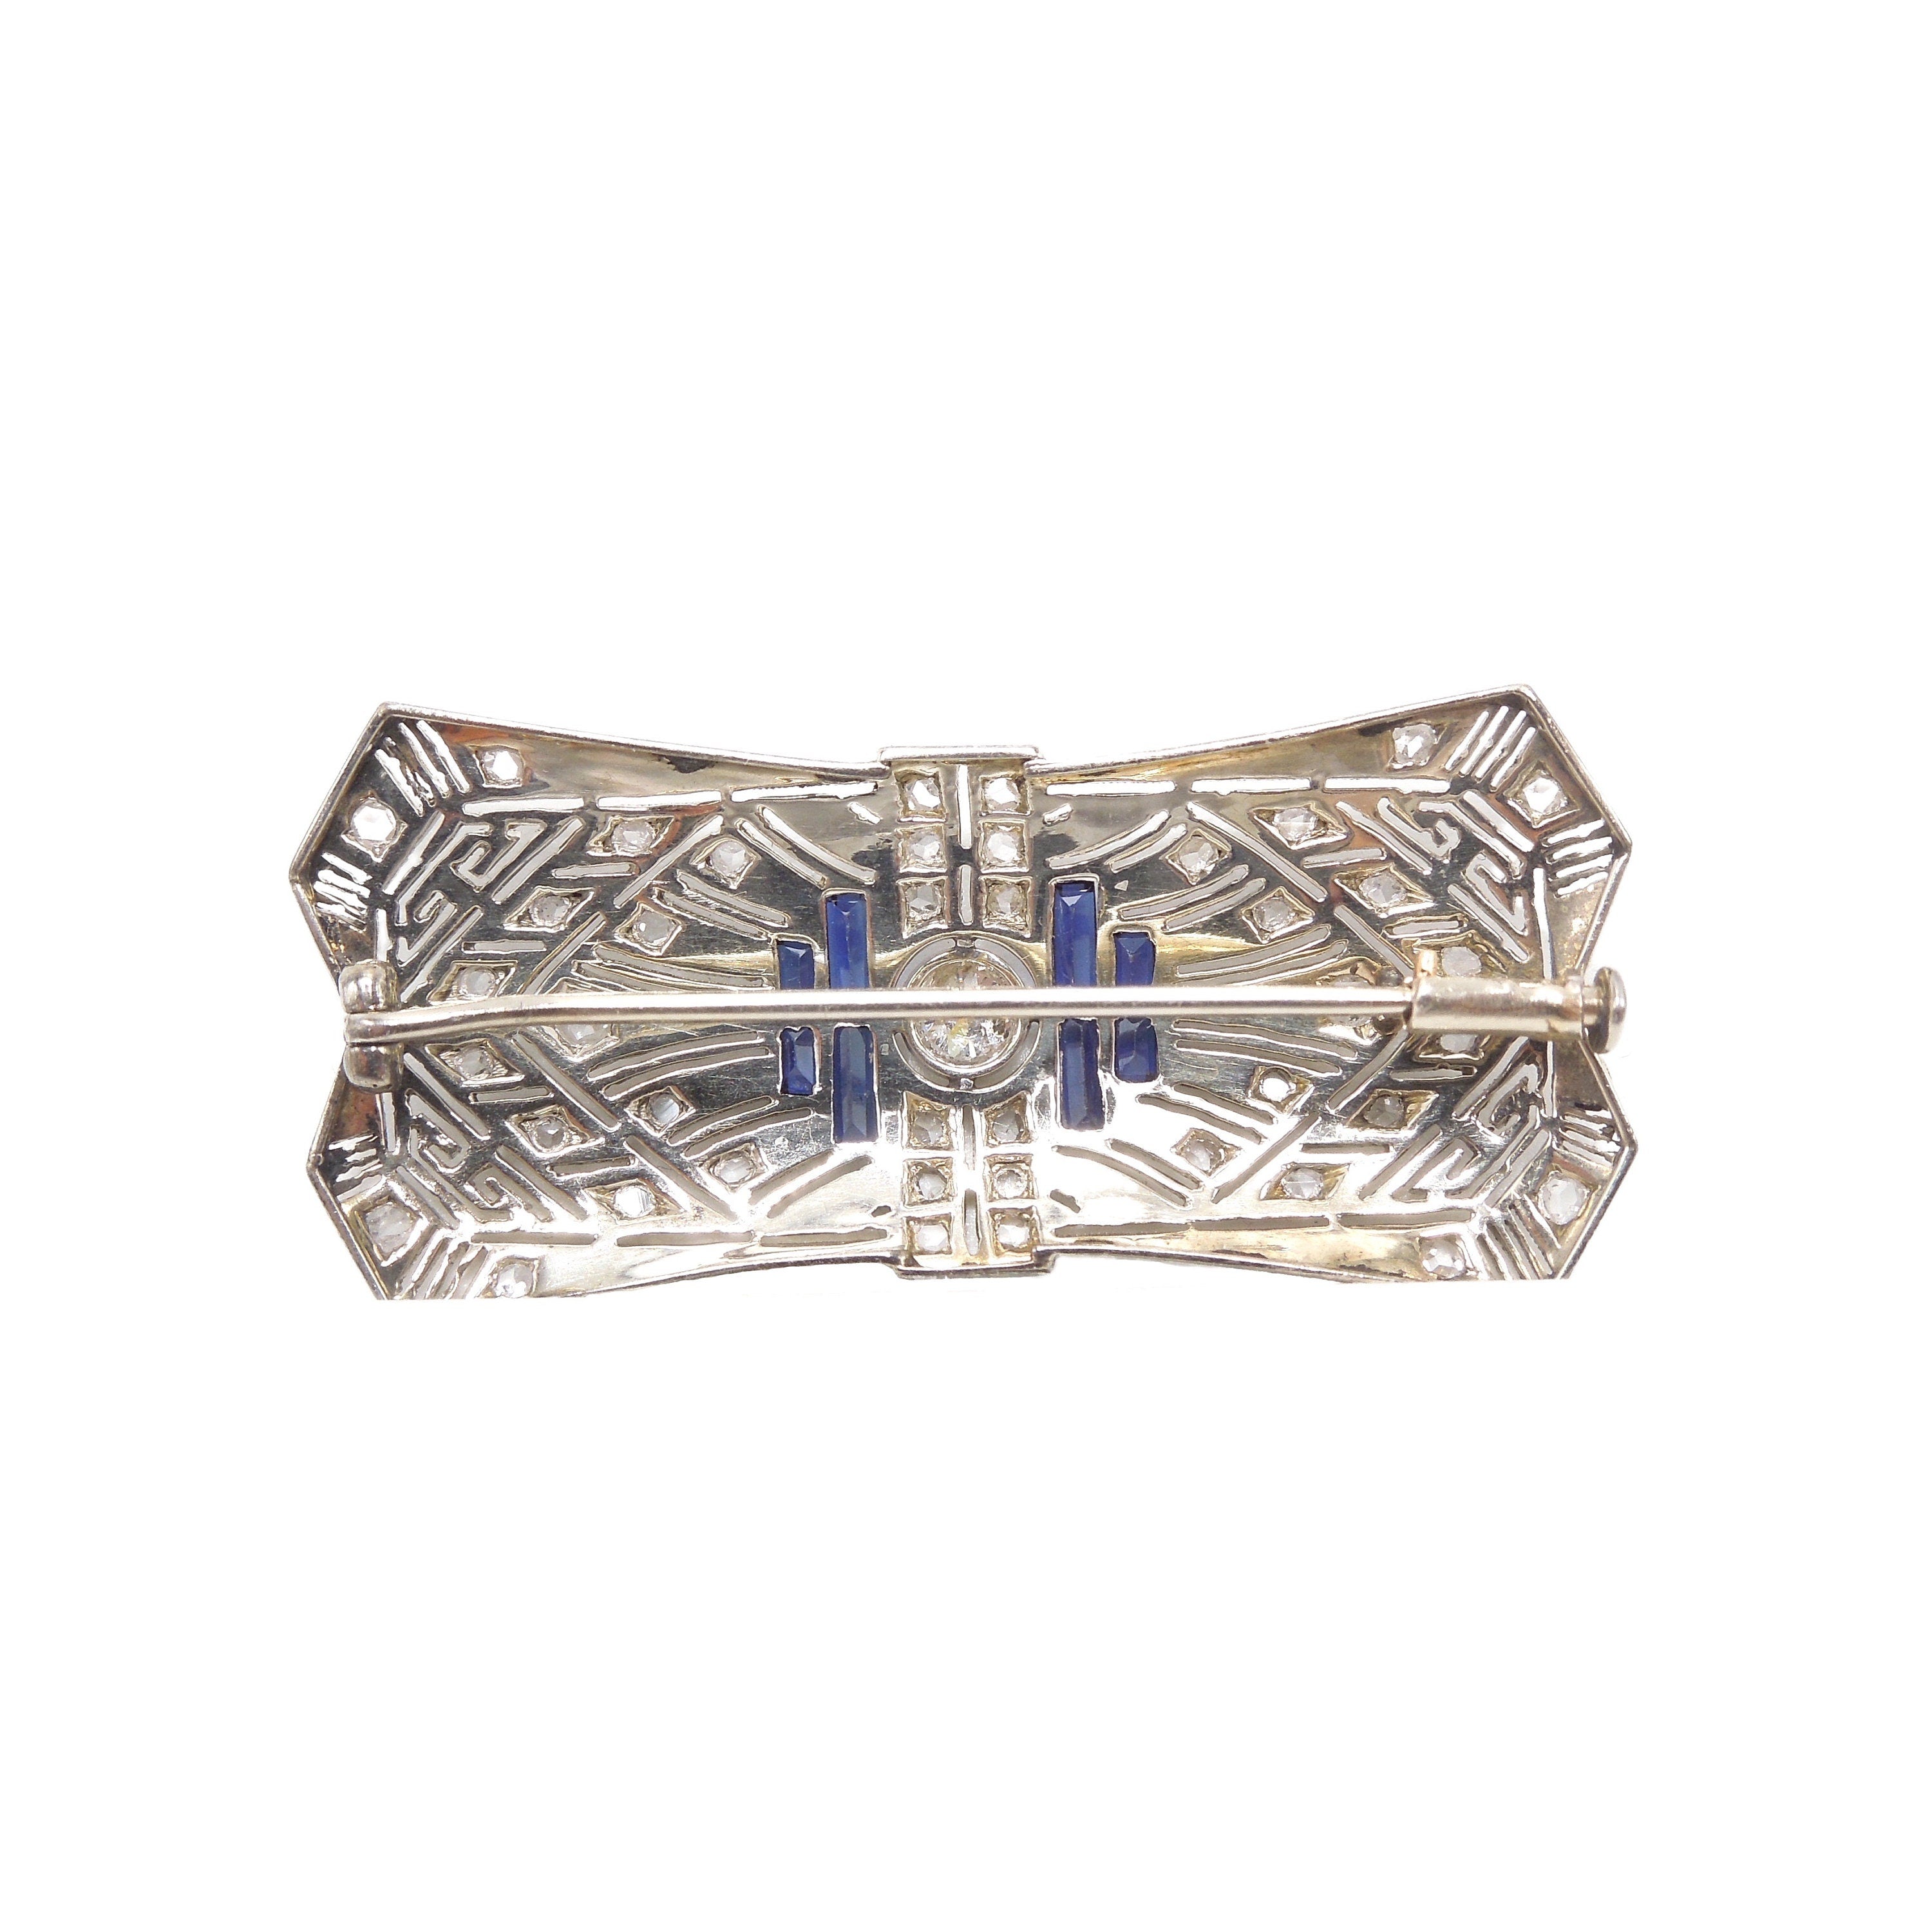 Estate Art Deco Platinum and 14K Filigree Brooch/Pendant with Diamonds and French Cut Sapphires